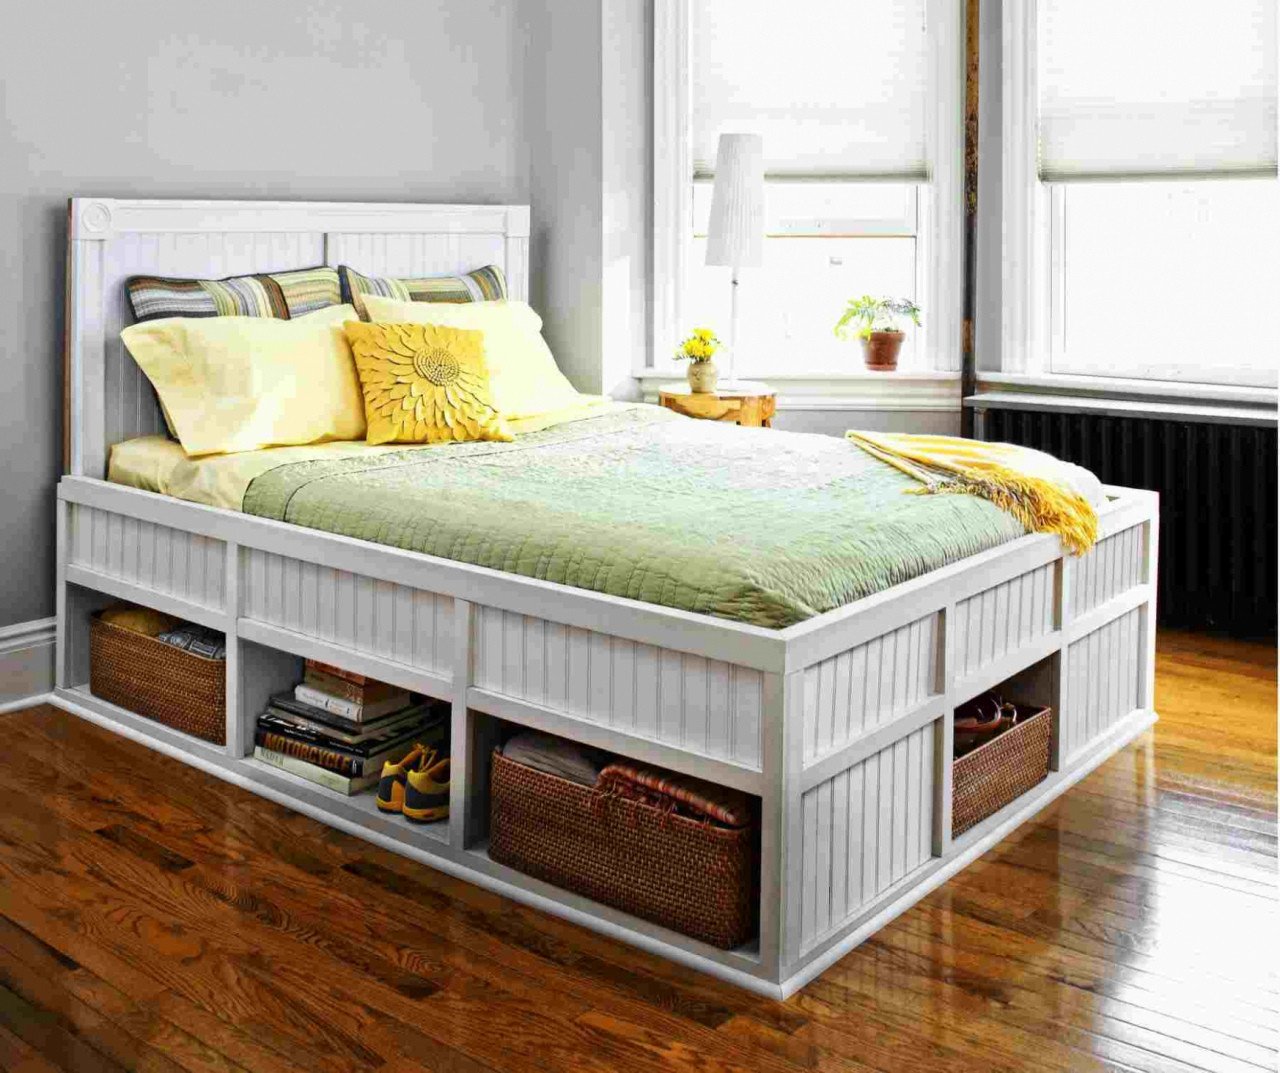 Distressed Wood Bedroom Furniture New Queen Bed Frame with Drawers — Procura Home Blog